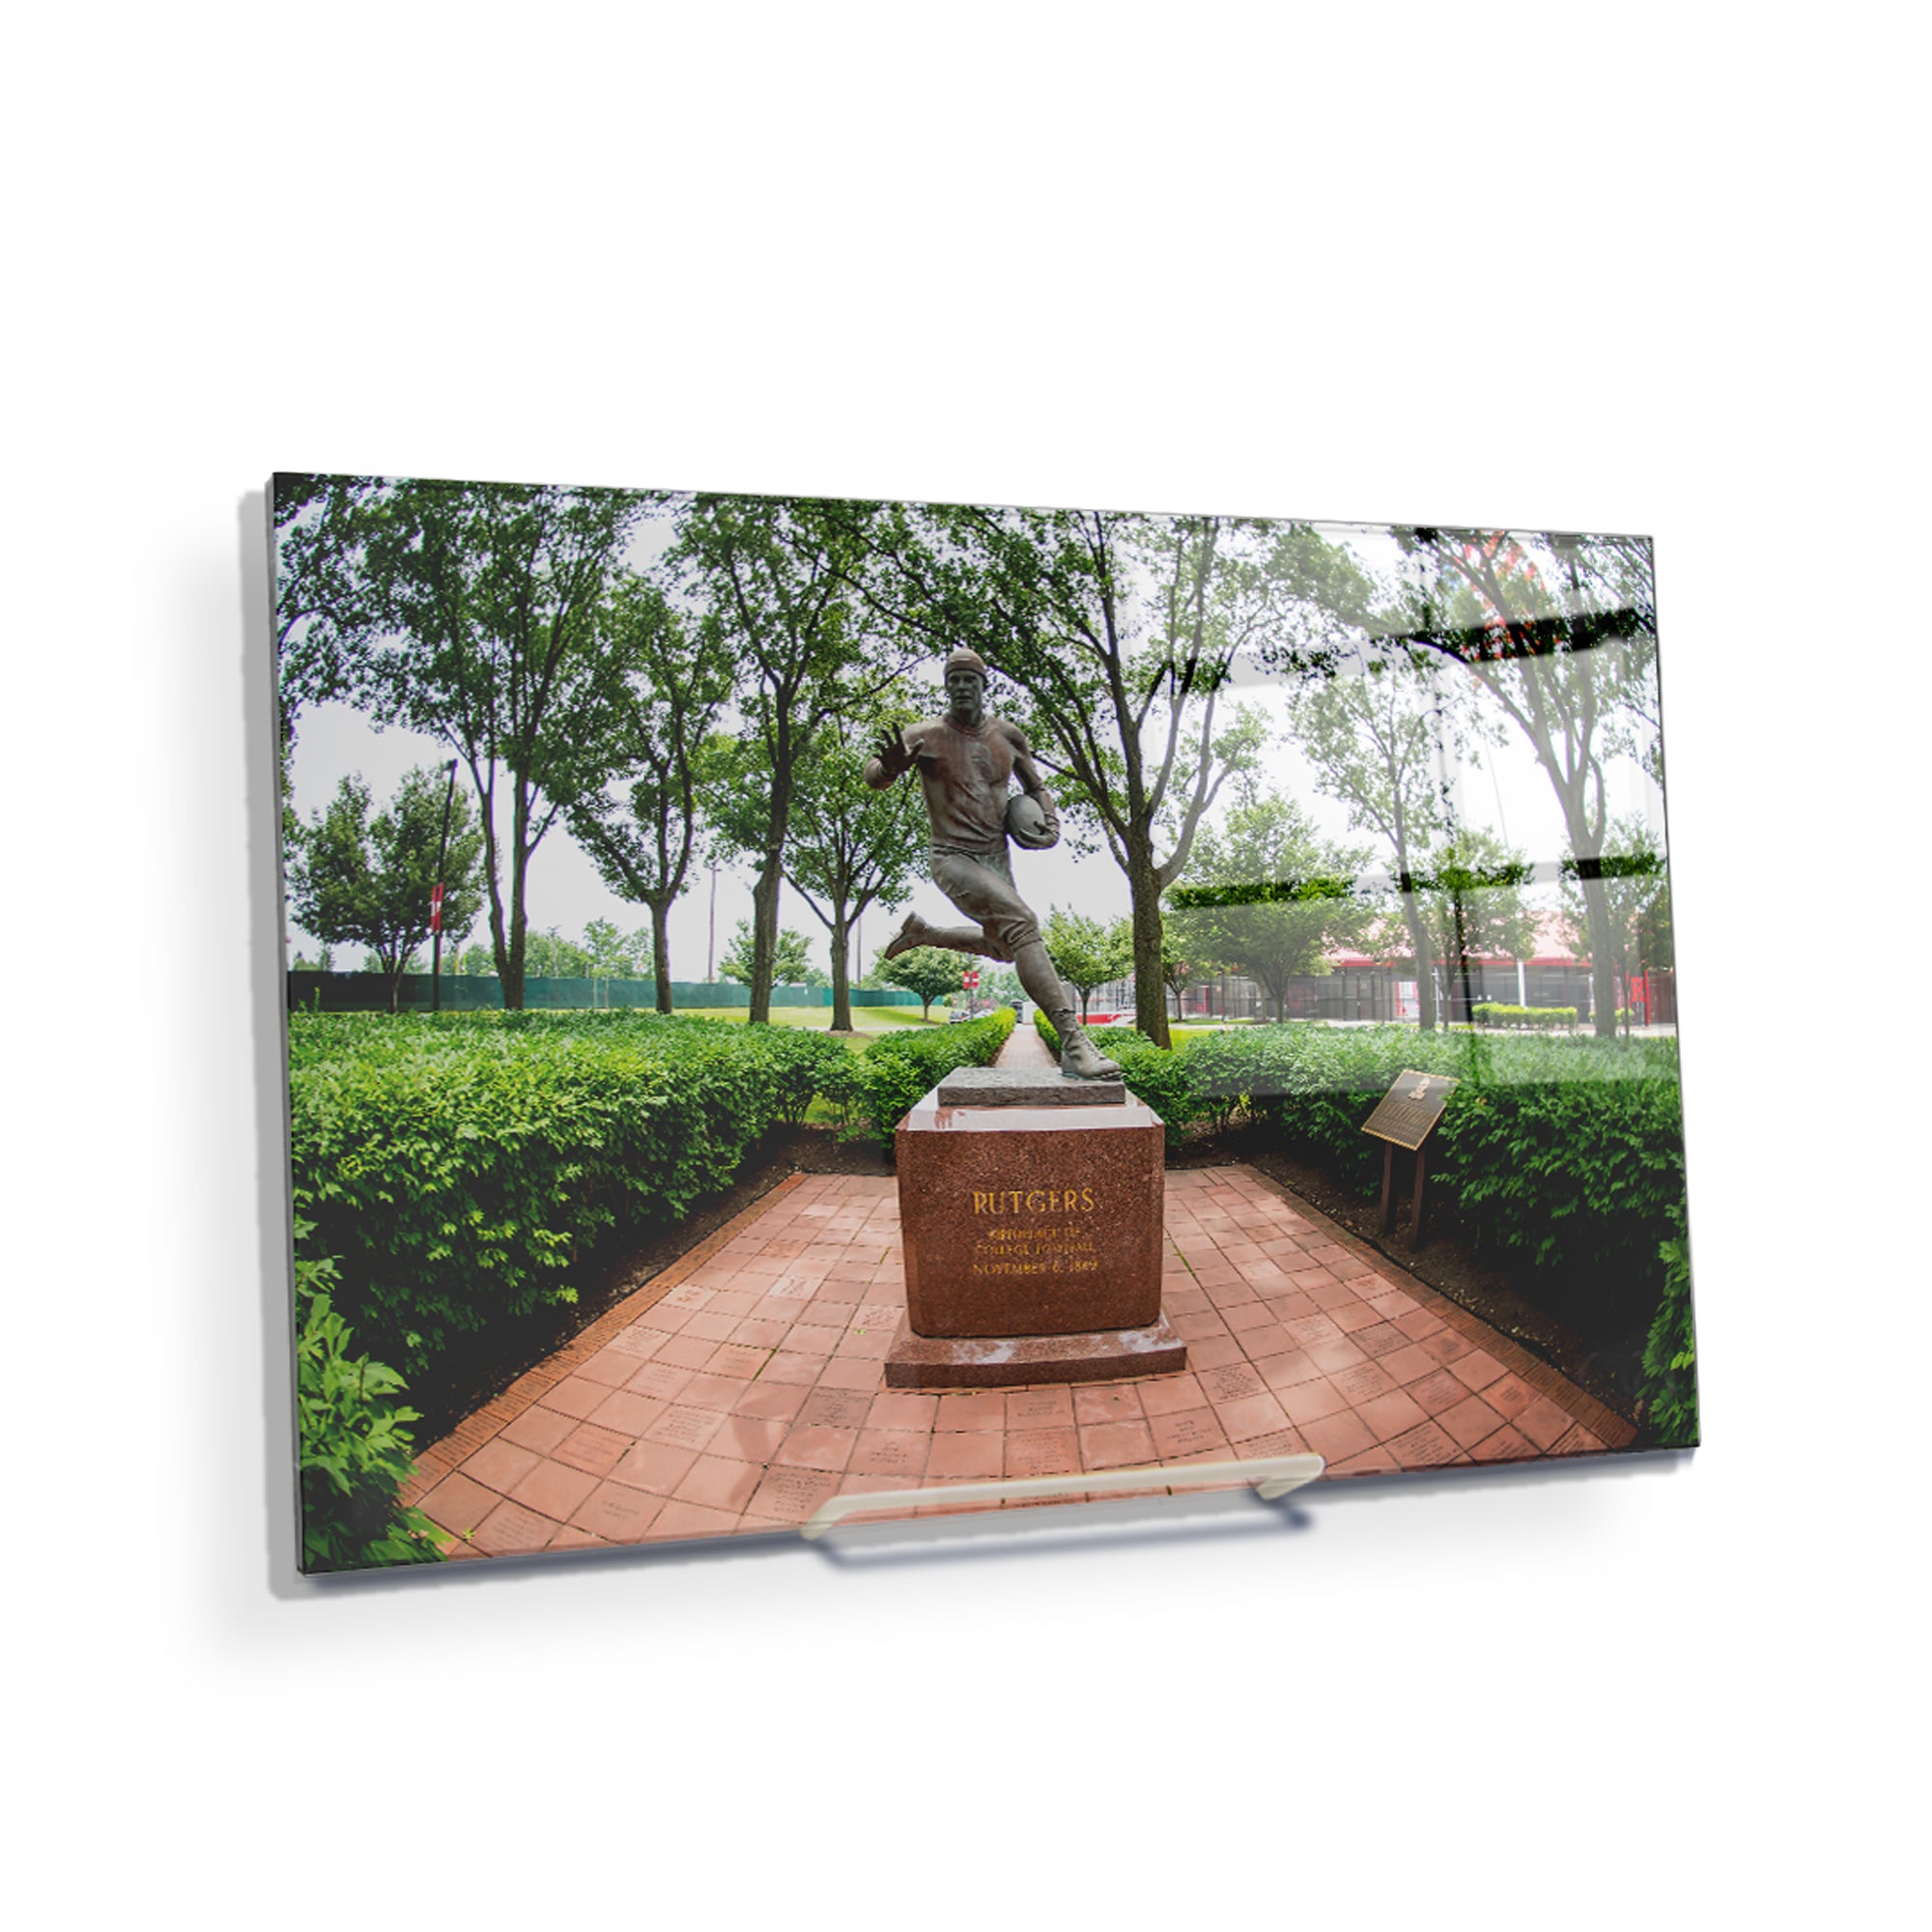 Rutgers Scarlet Knights - Birthplace Statue - College Wall Art #Canvas